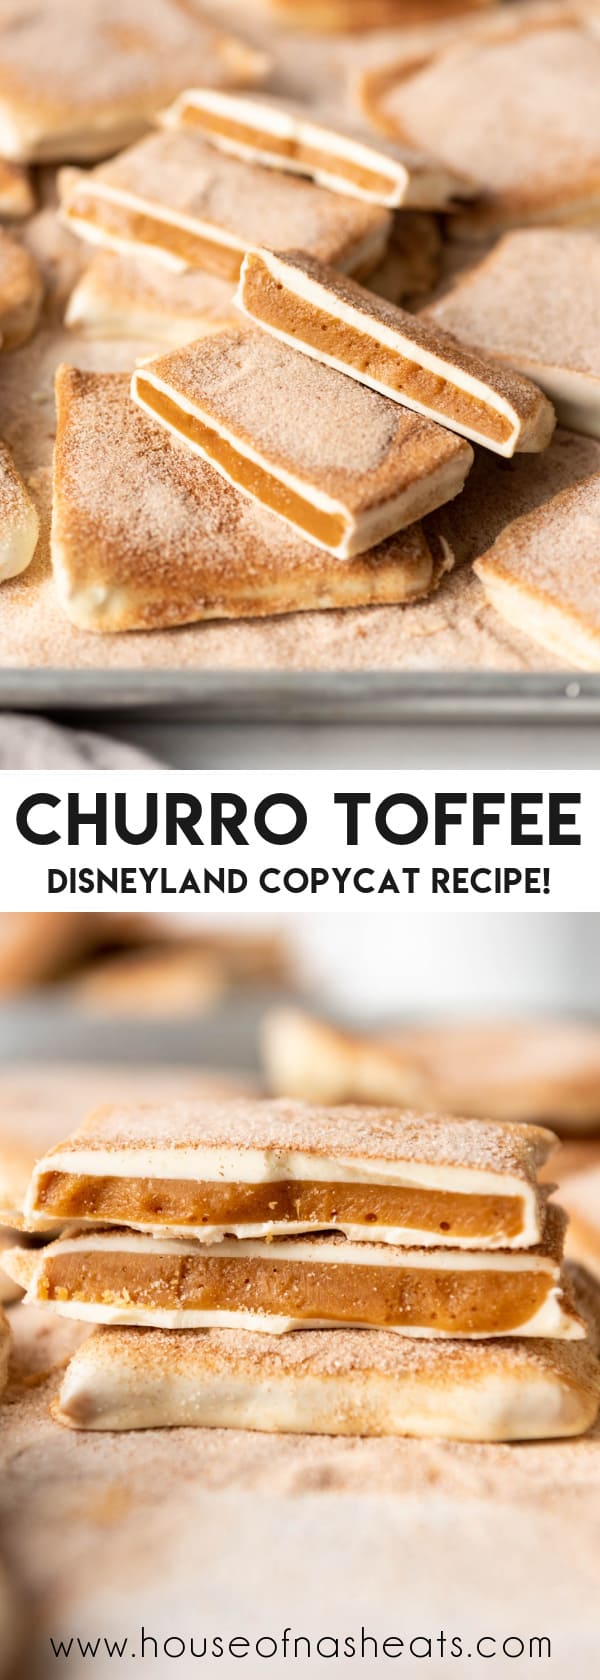 A collage of images of churro toffee with text overlay.